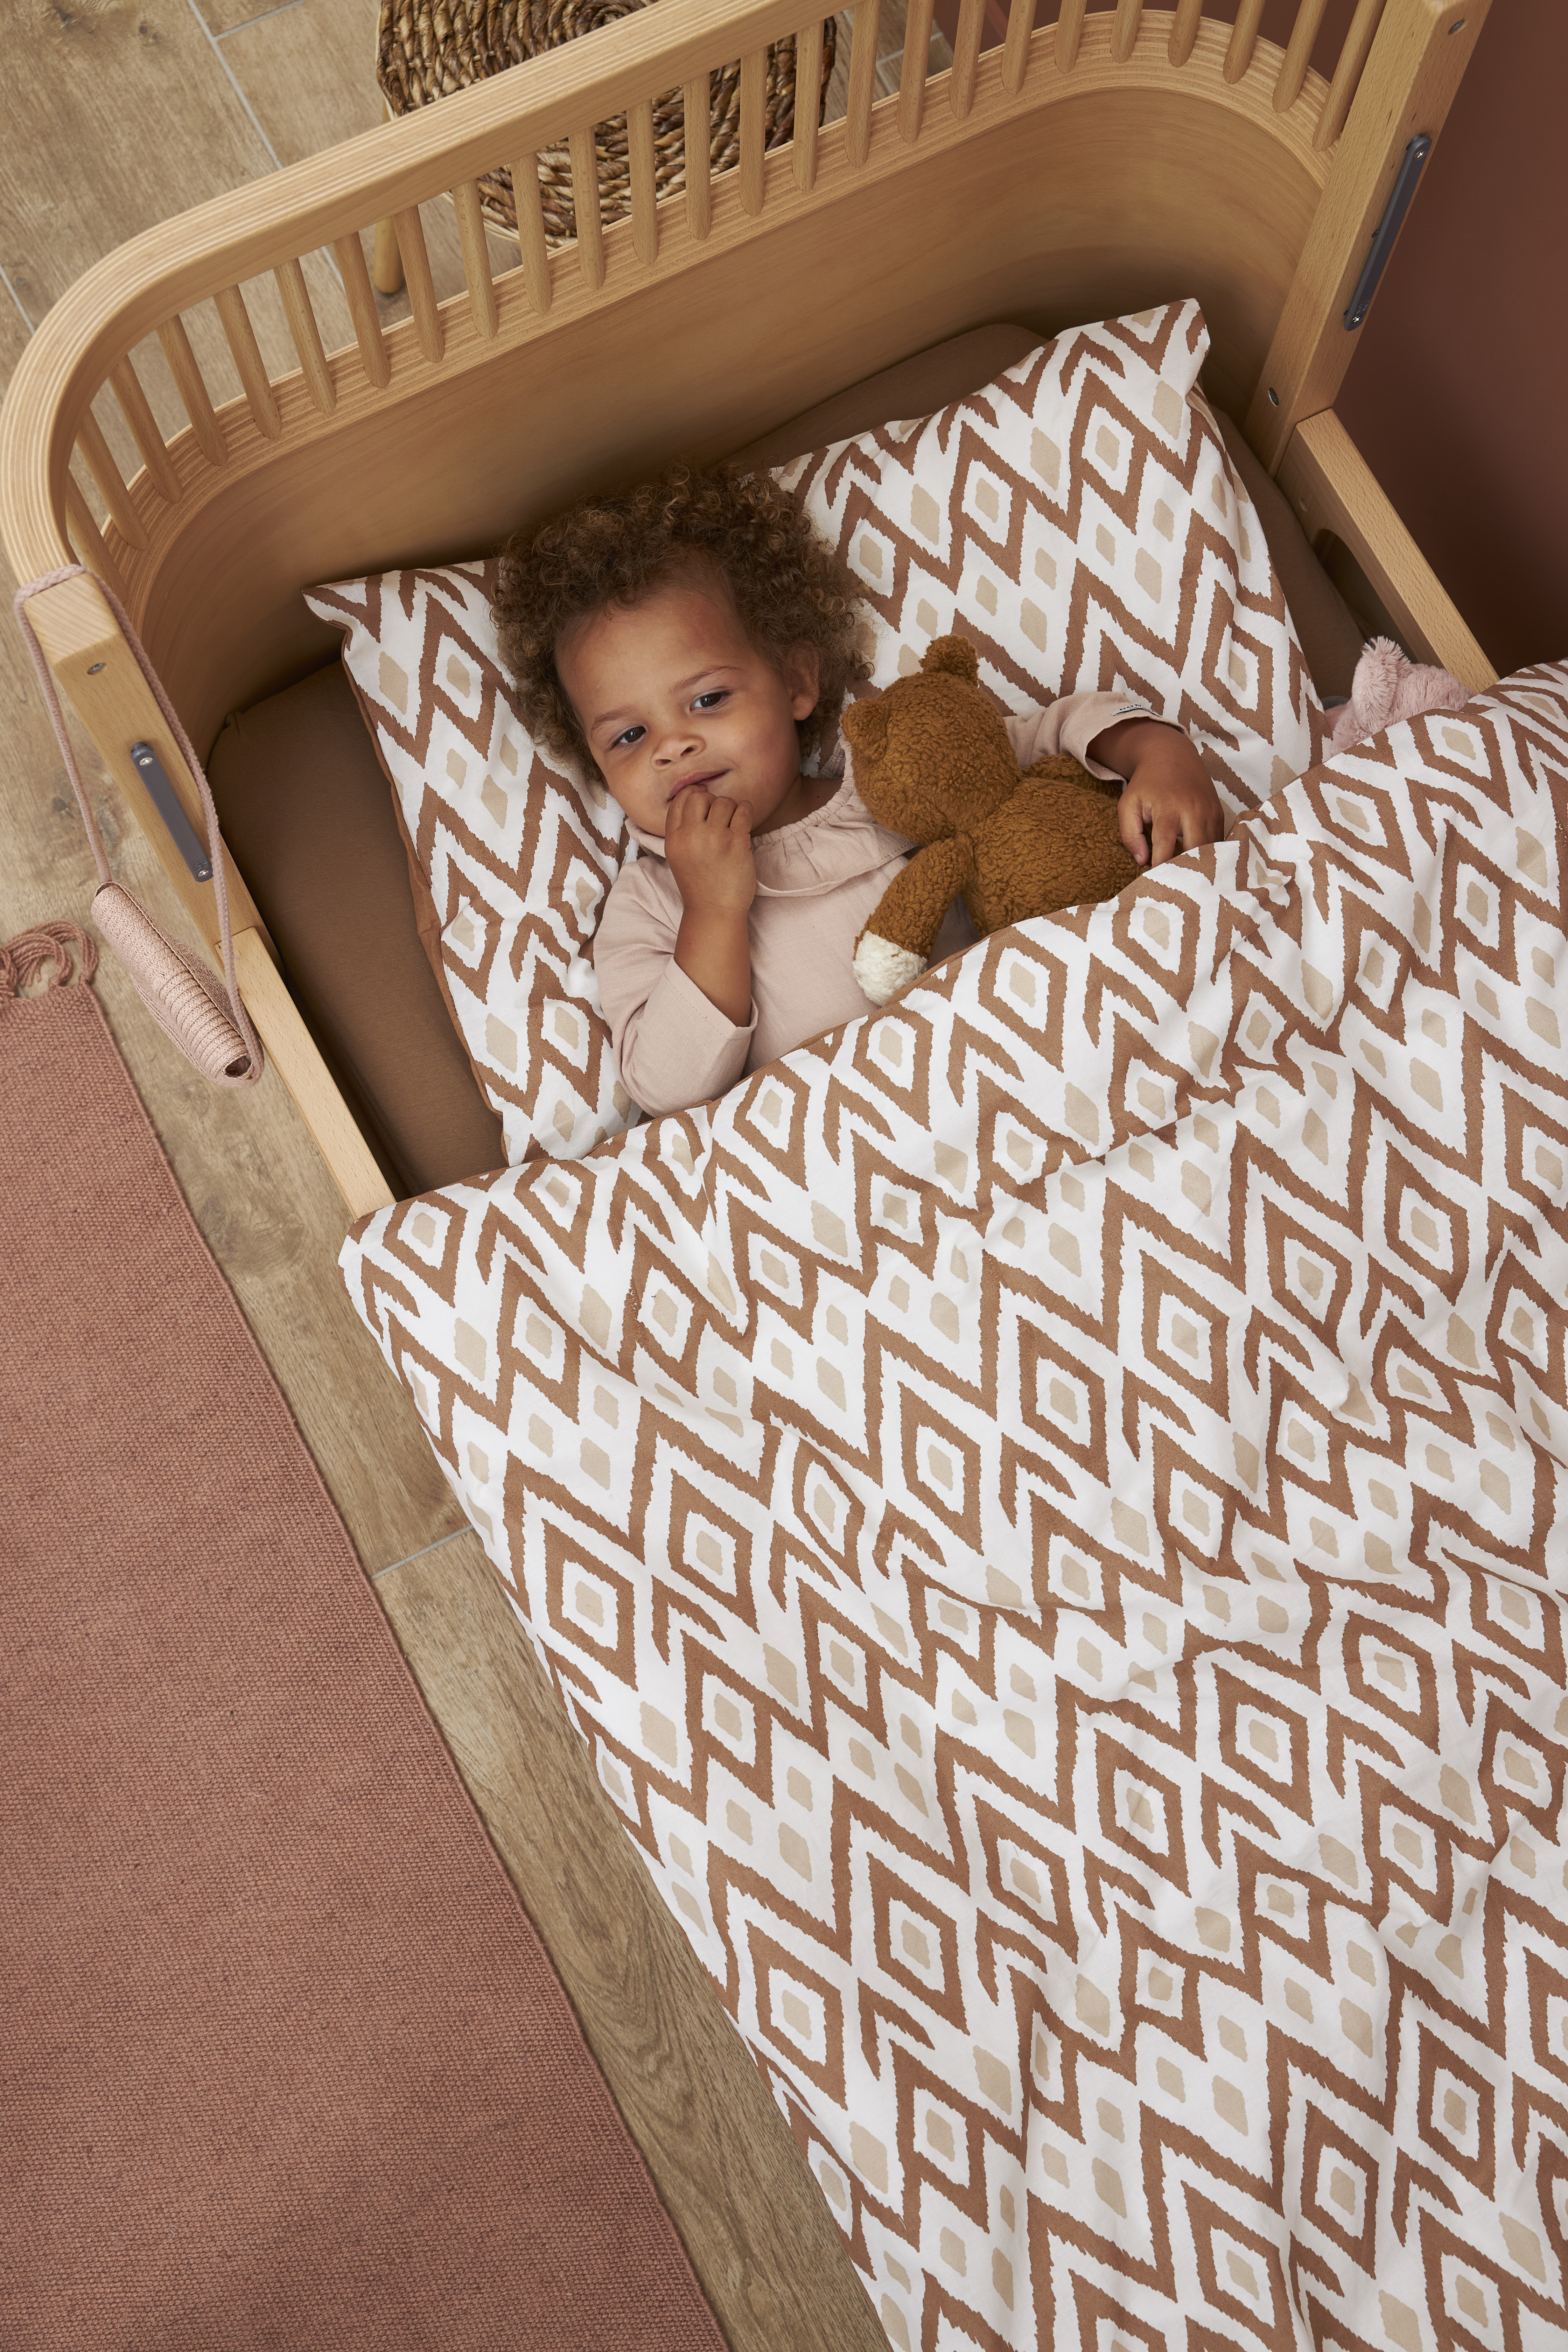 Duvet cover juniorbed Ikat - sand/toffee - 120x150cm